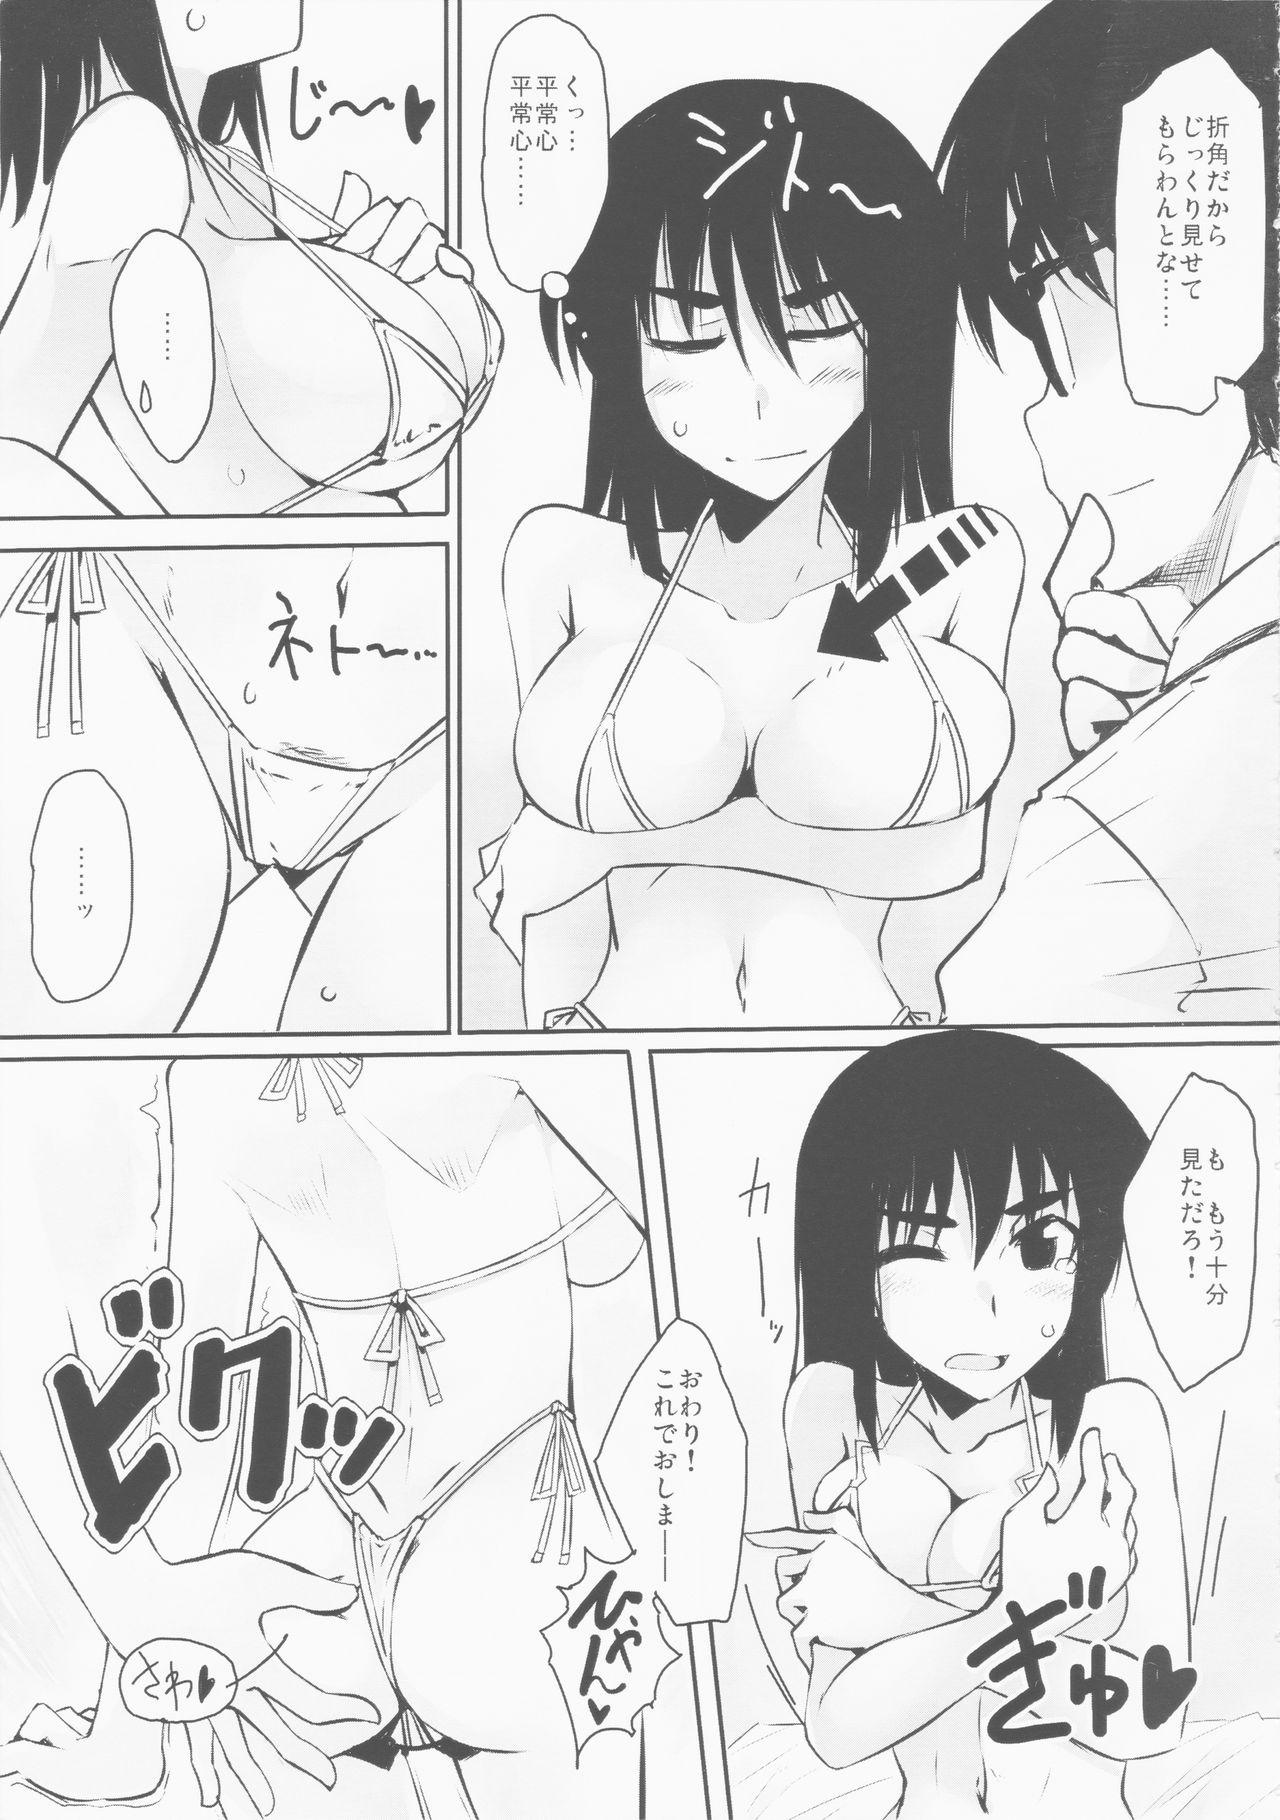 Strap On Natsumiko - School rumble Black Hair - Page 6